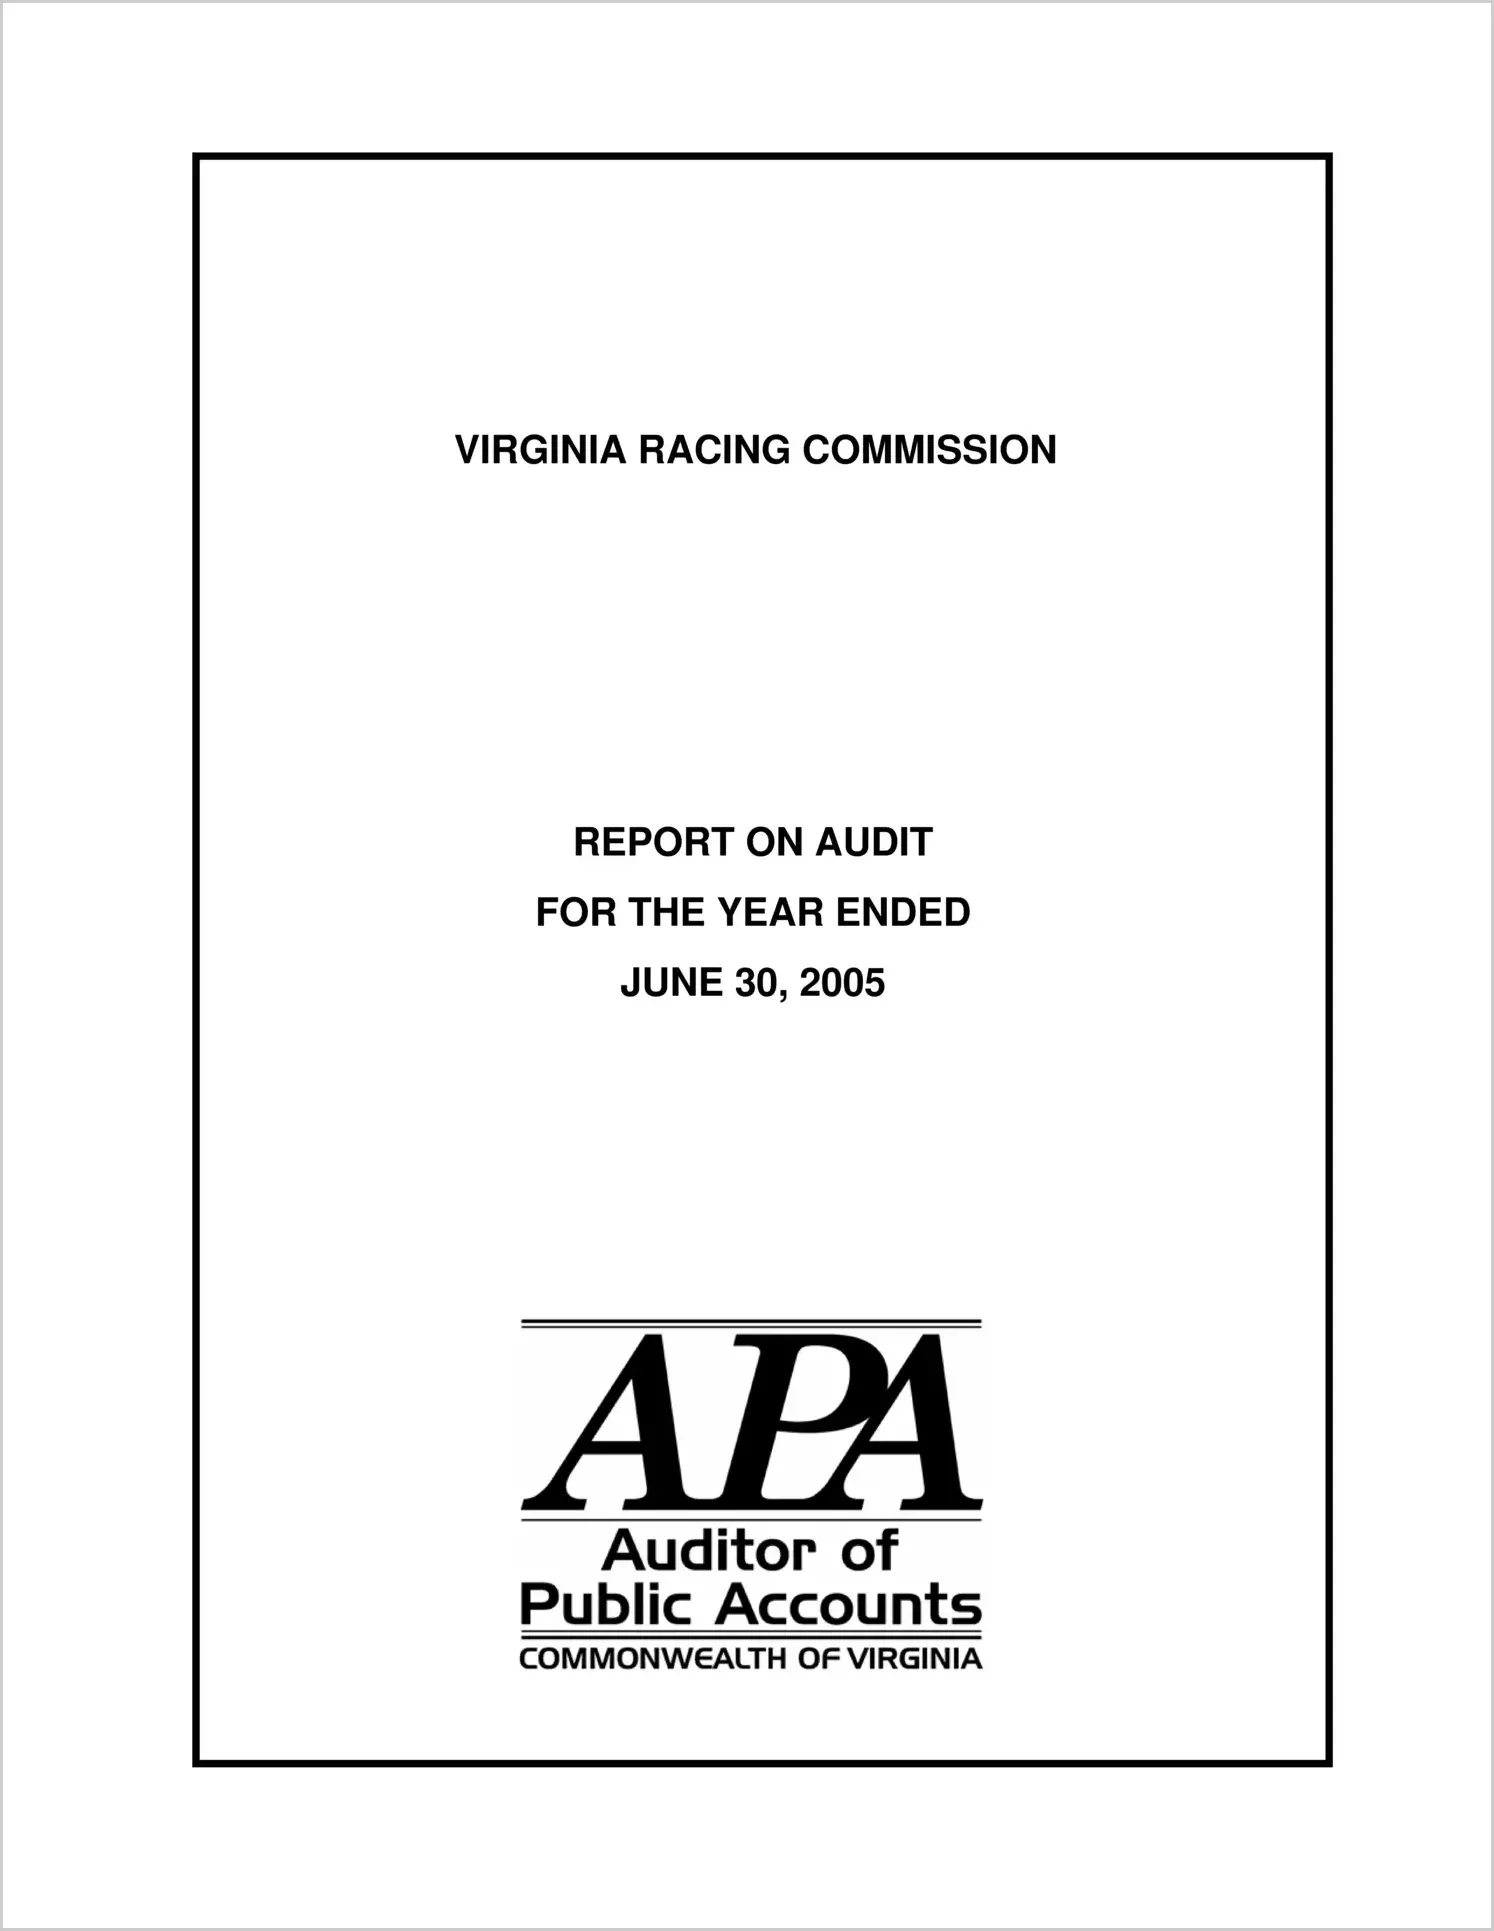 Virginia Racing Commission for the year ended June 30, 2005